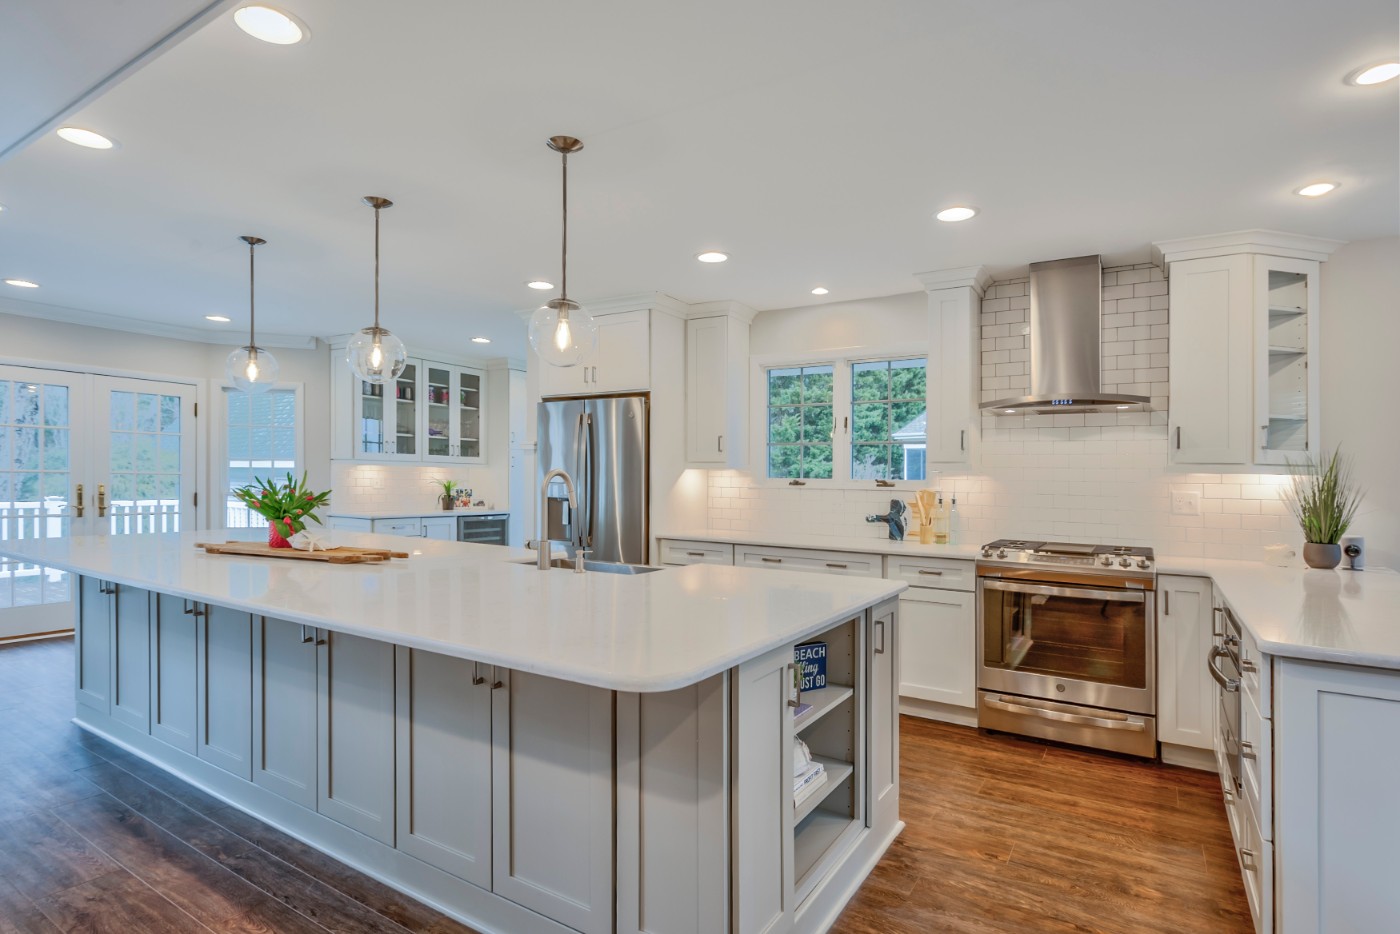 Canal Way Renovation in Bethany Beach DE - Kitchen with Center Island and Three Vintage Pendant Lights